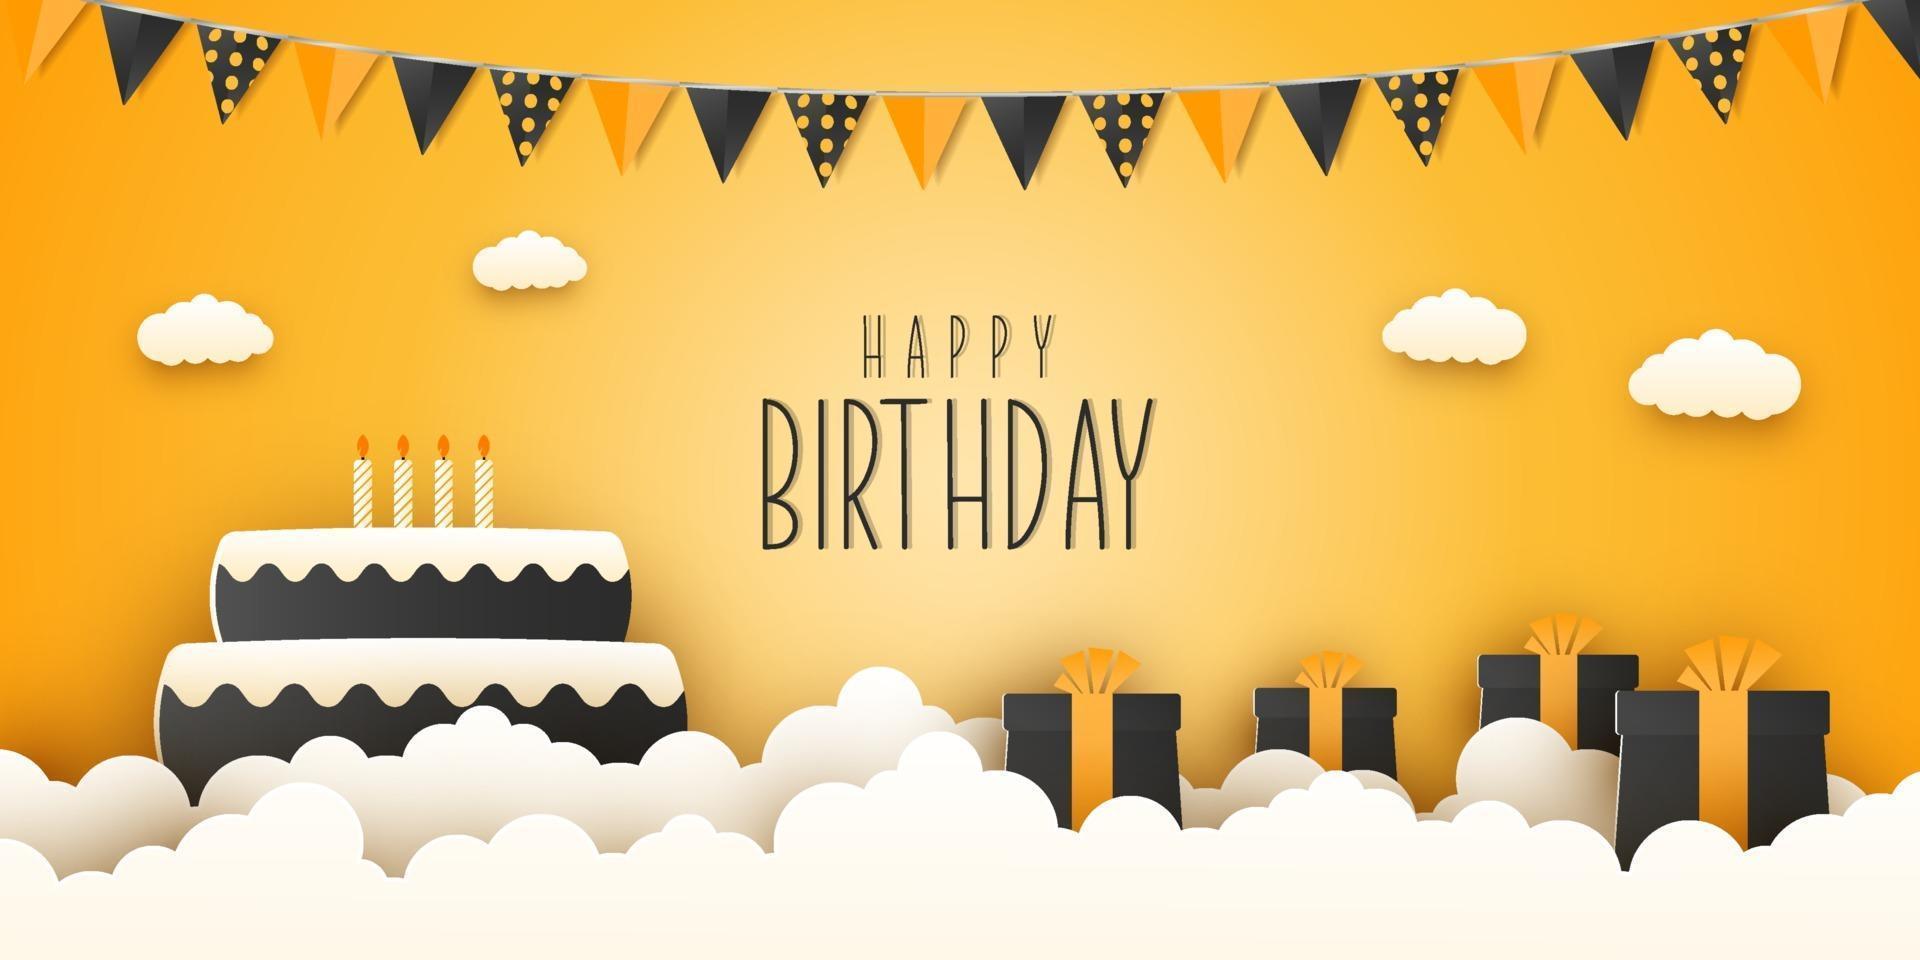 Happy birthday card in paper cut style vector